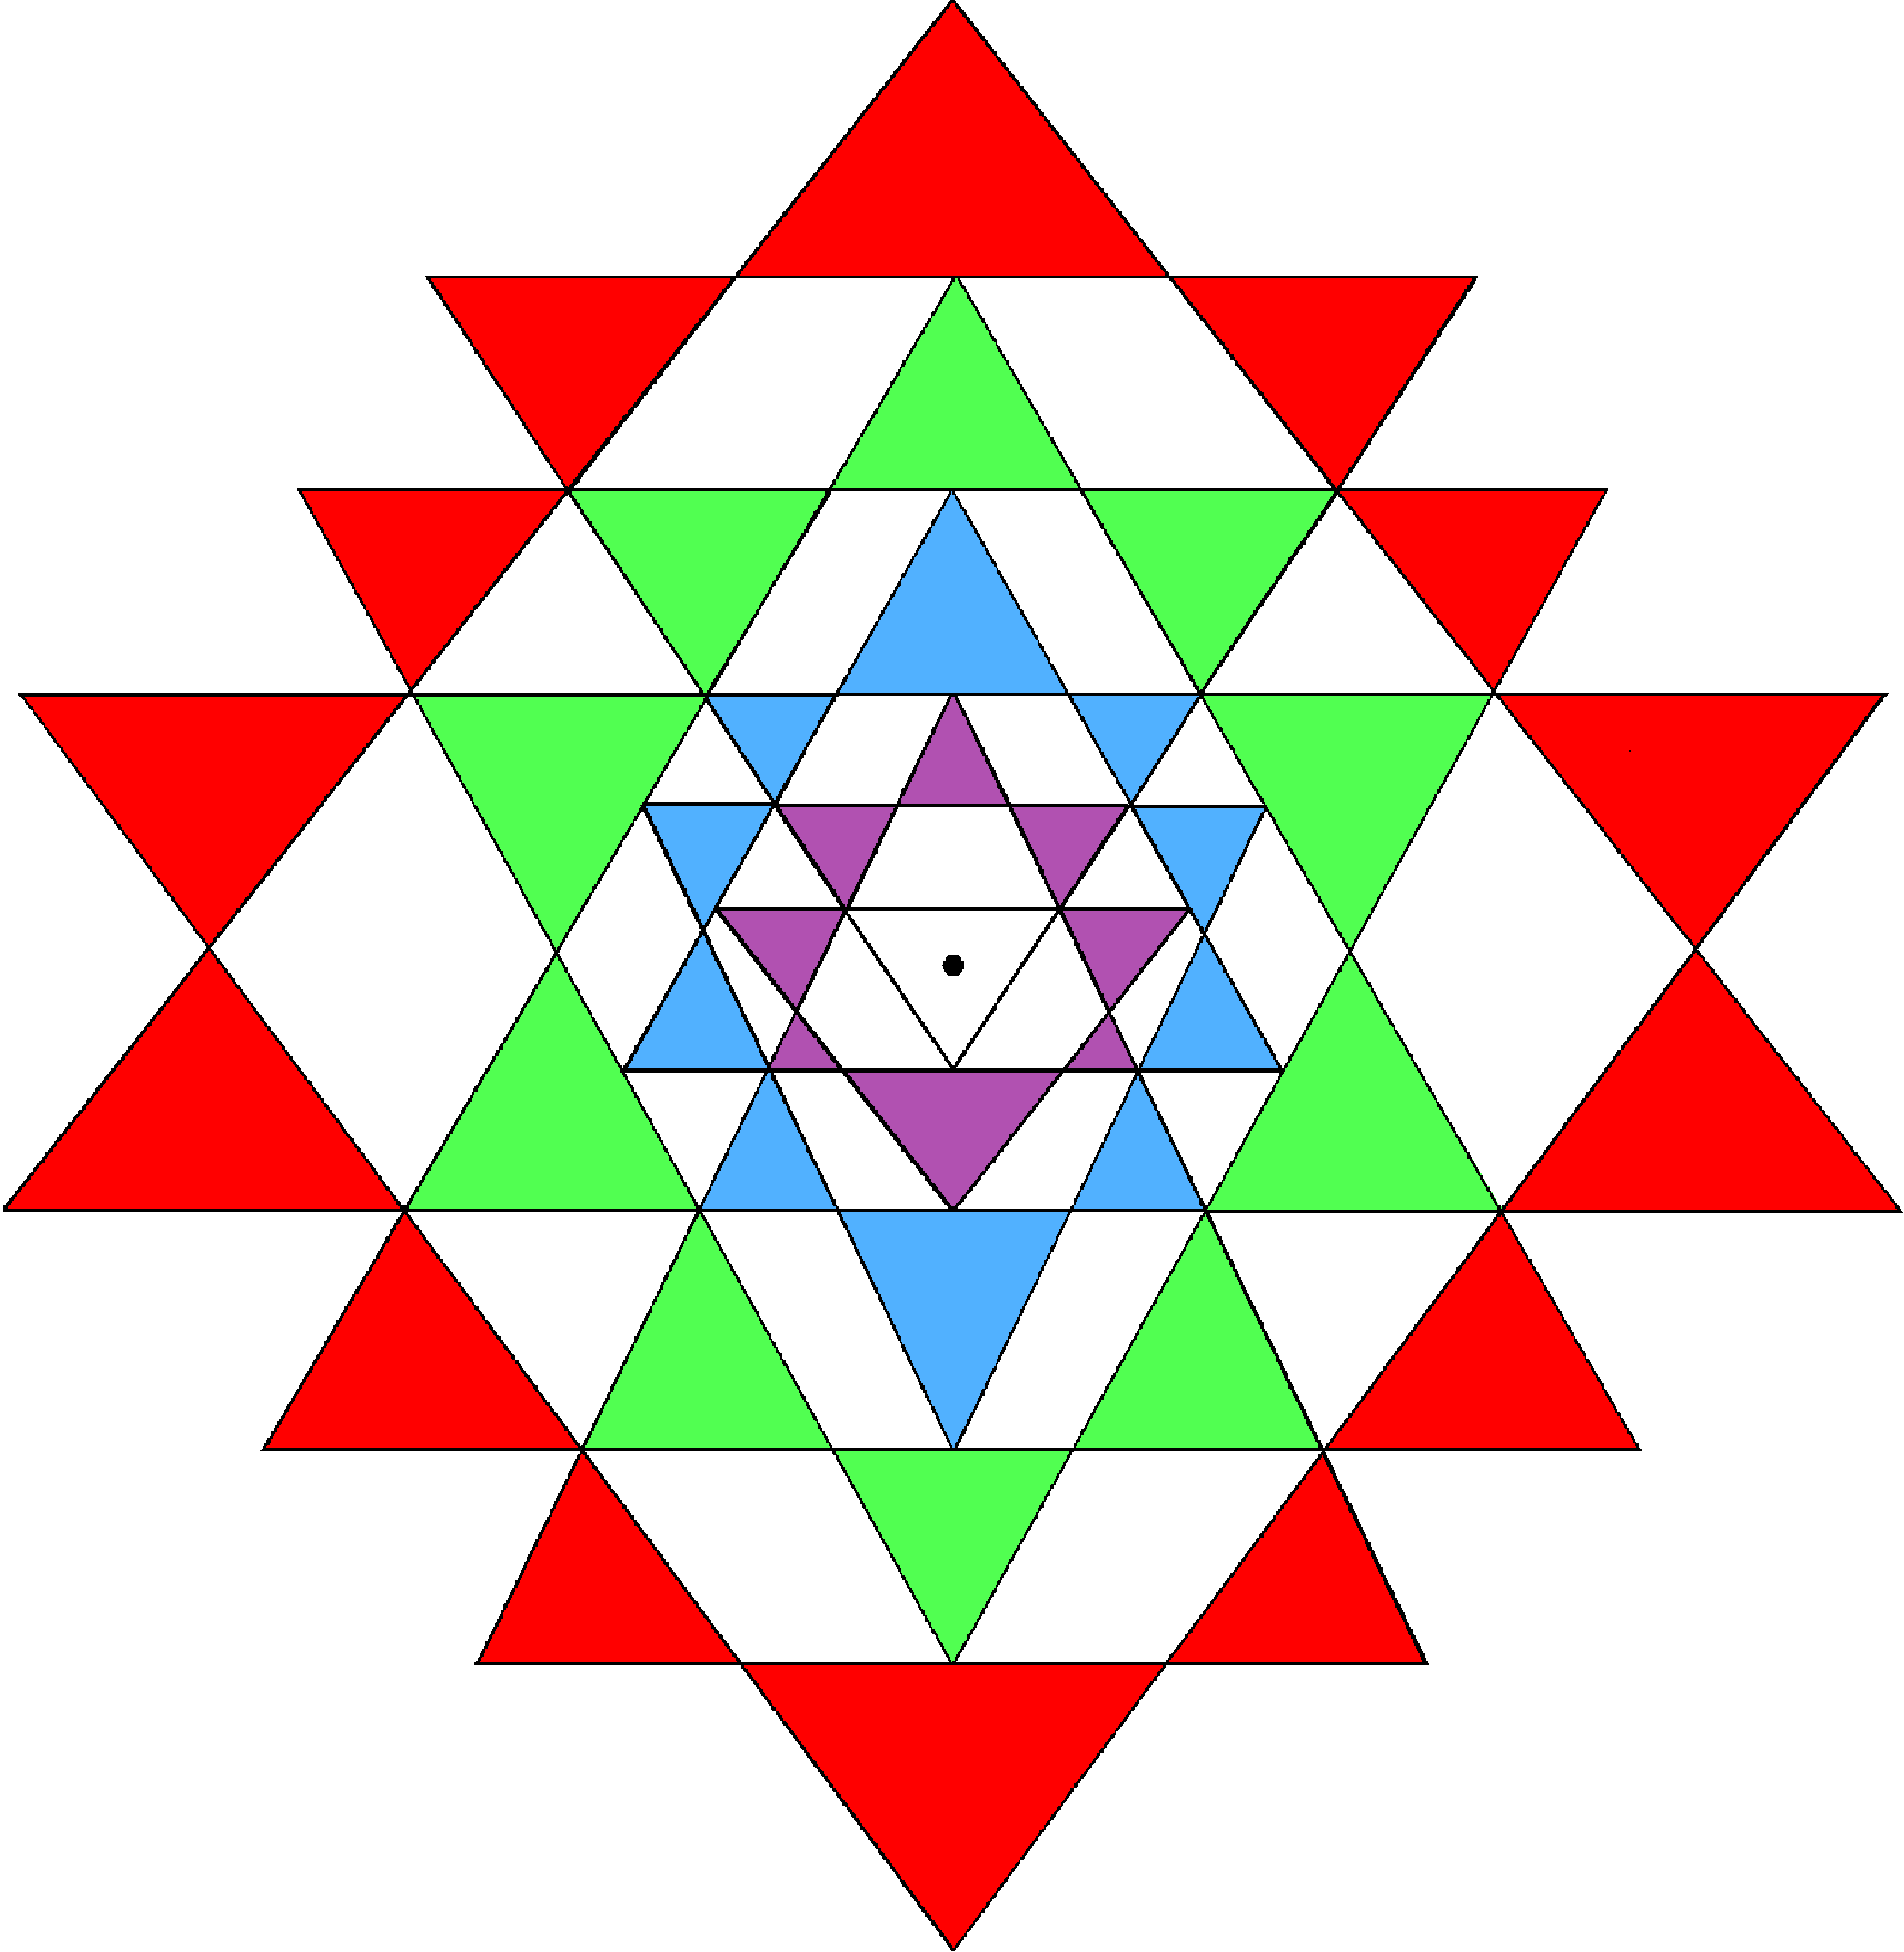 240 geometrical elements surround the centre of the 2-d Sri Yantra